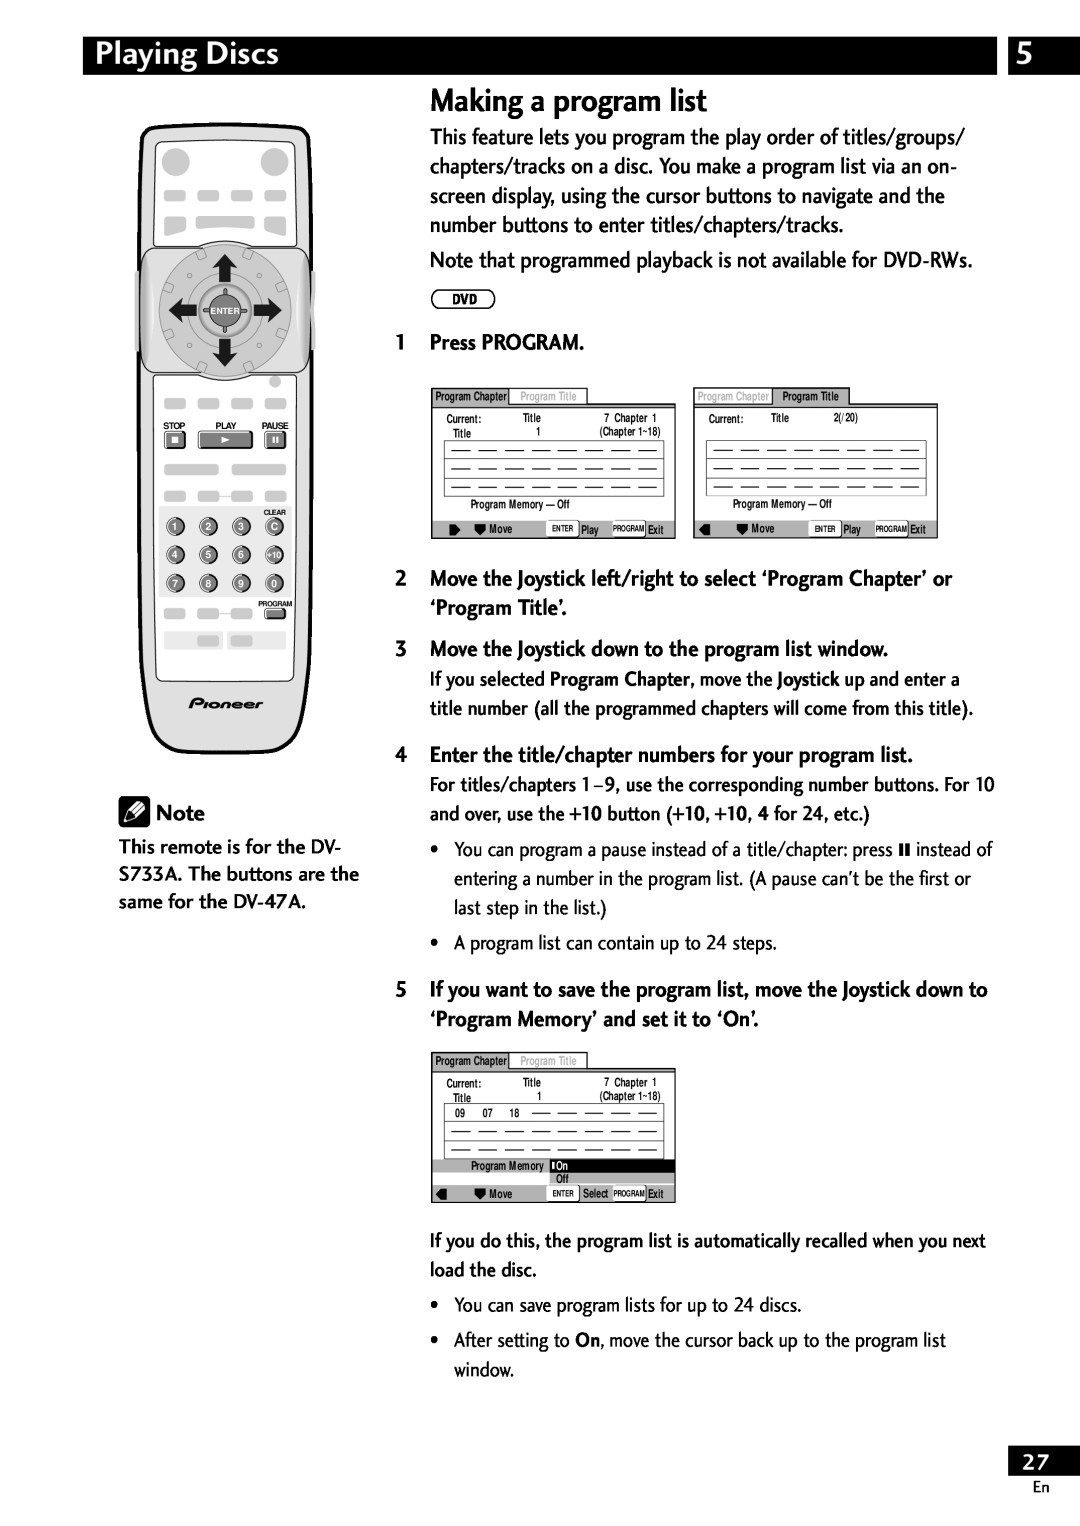 Pioneer DV-S733A Making a program list, Note that programmed playback is not available for DVD-RWs, Press PROGRAM 